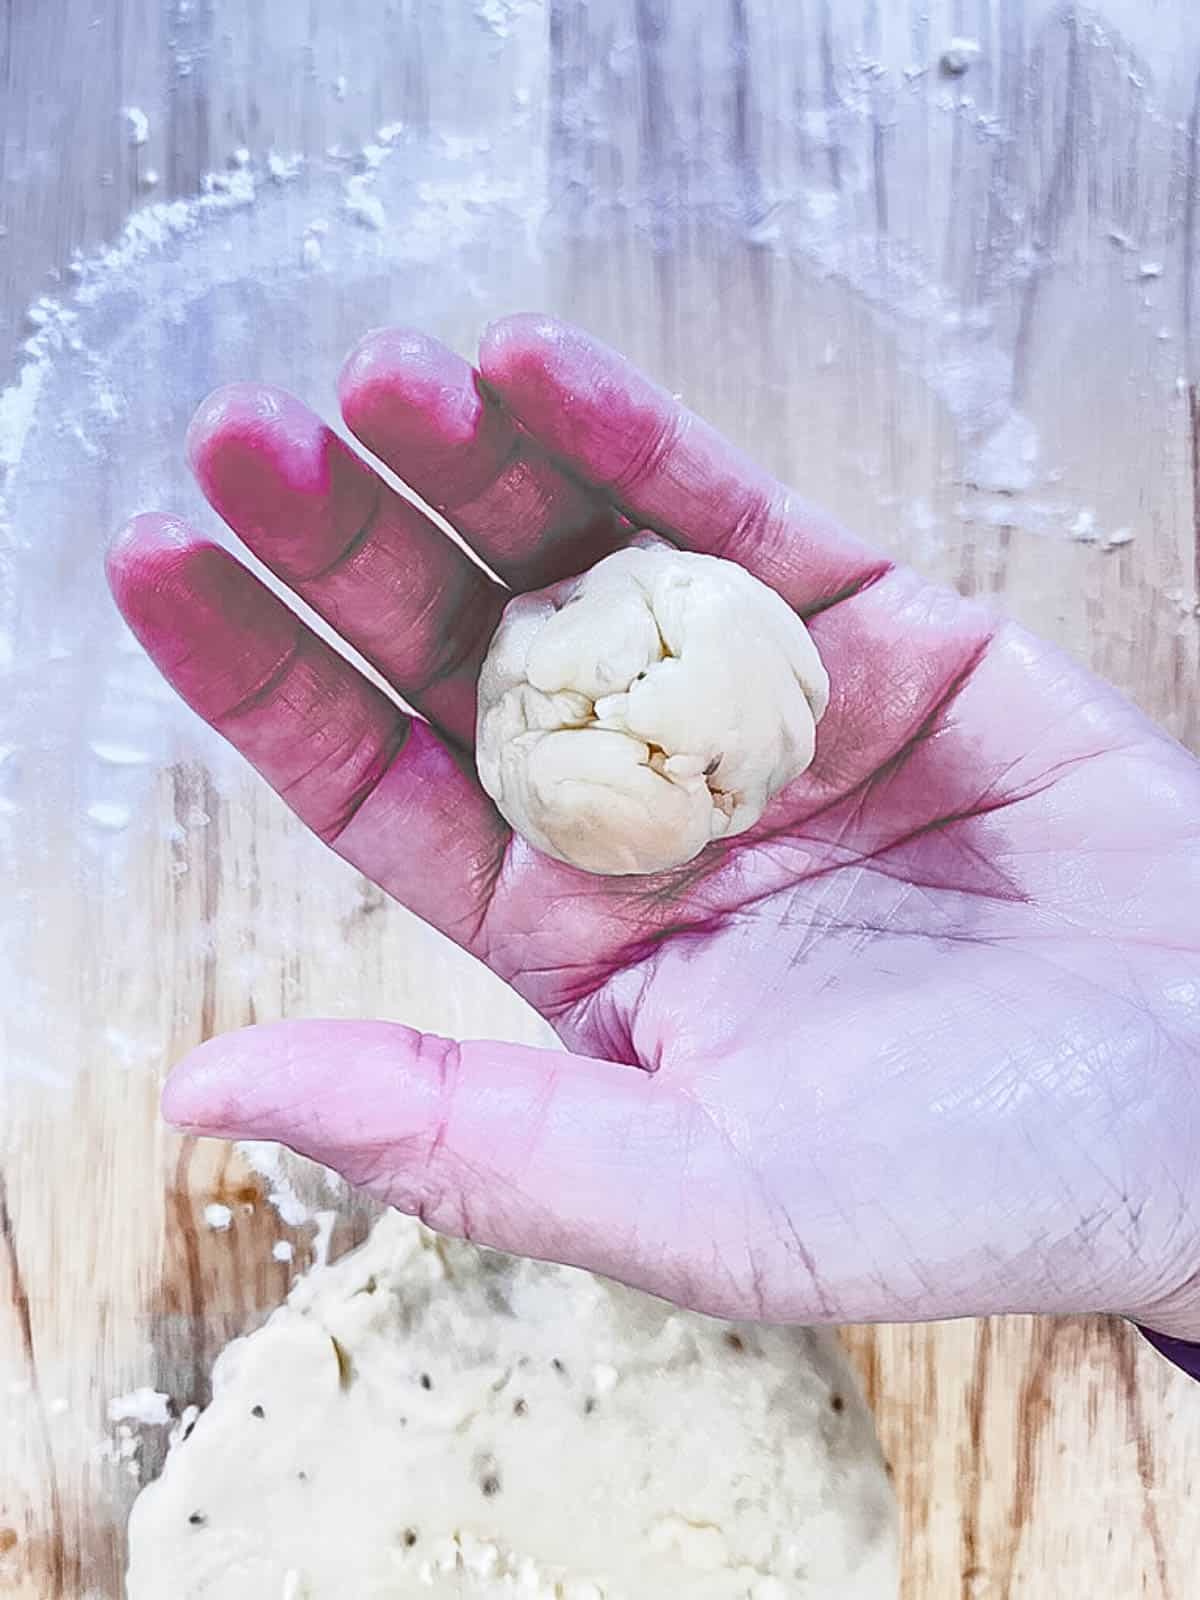 A small ball of samosa dough in a hand.